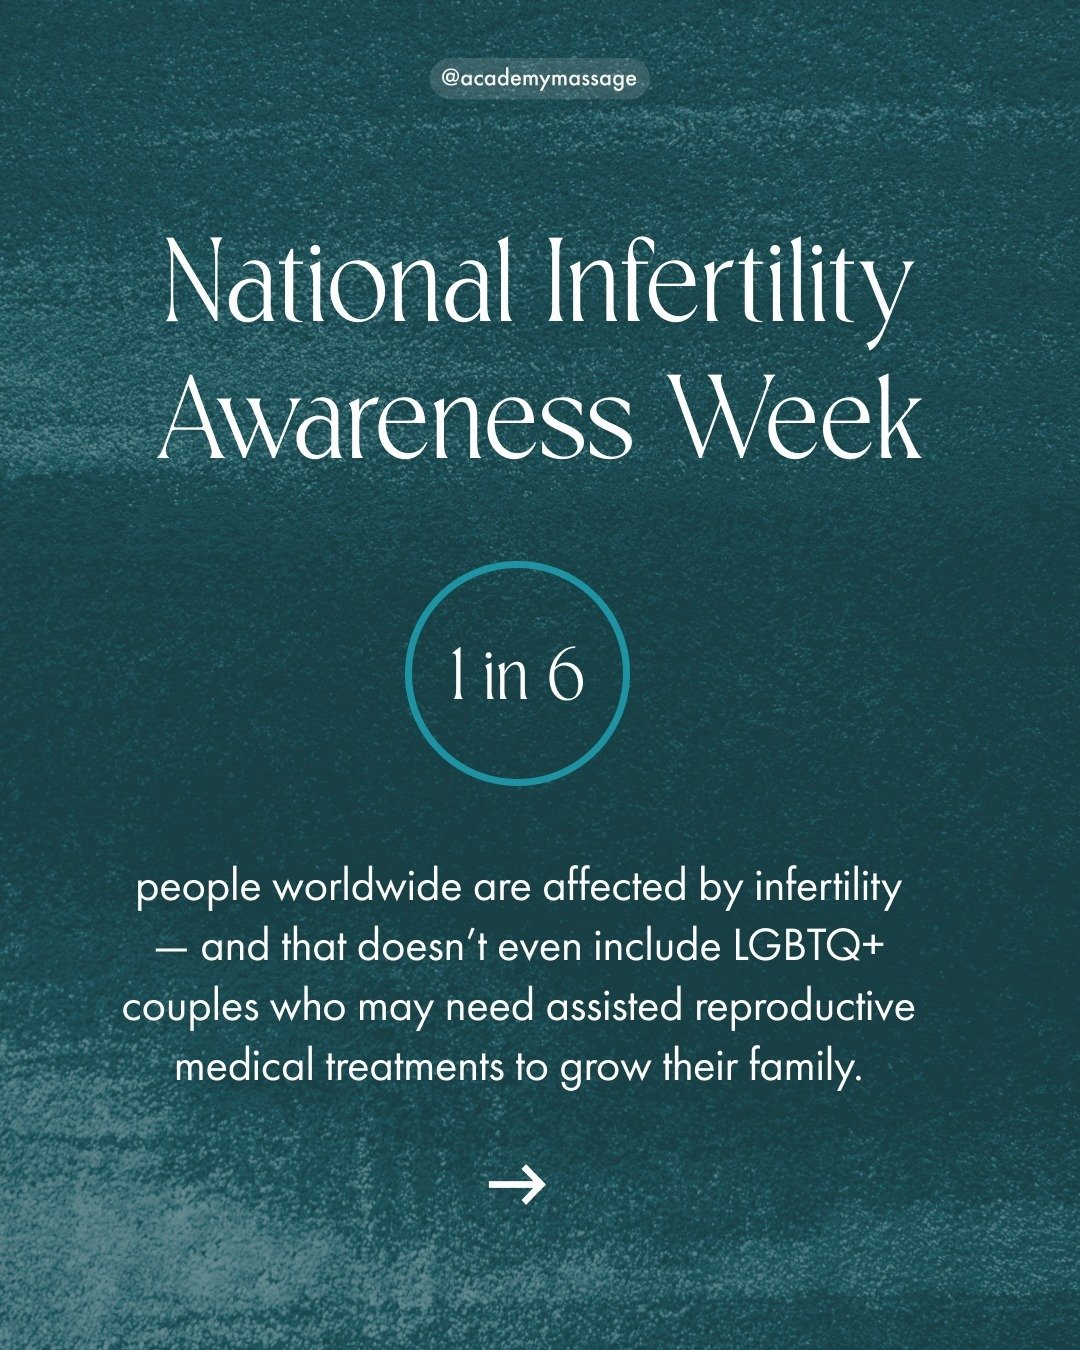 🫶 This week was National Infertility Awareness Week. Just because the week is ending doesn't mean we should stop talking about these important facts. Chances are you know someone (or multiple) who's dealing with infertility right now, and it can be 